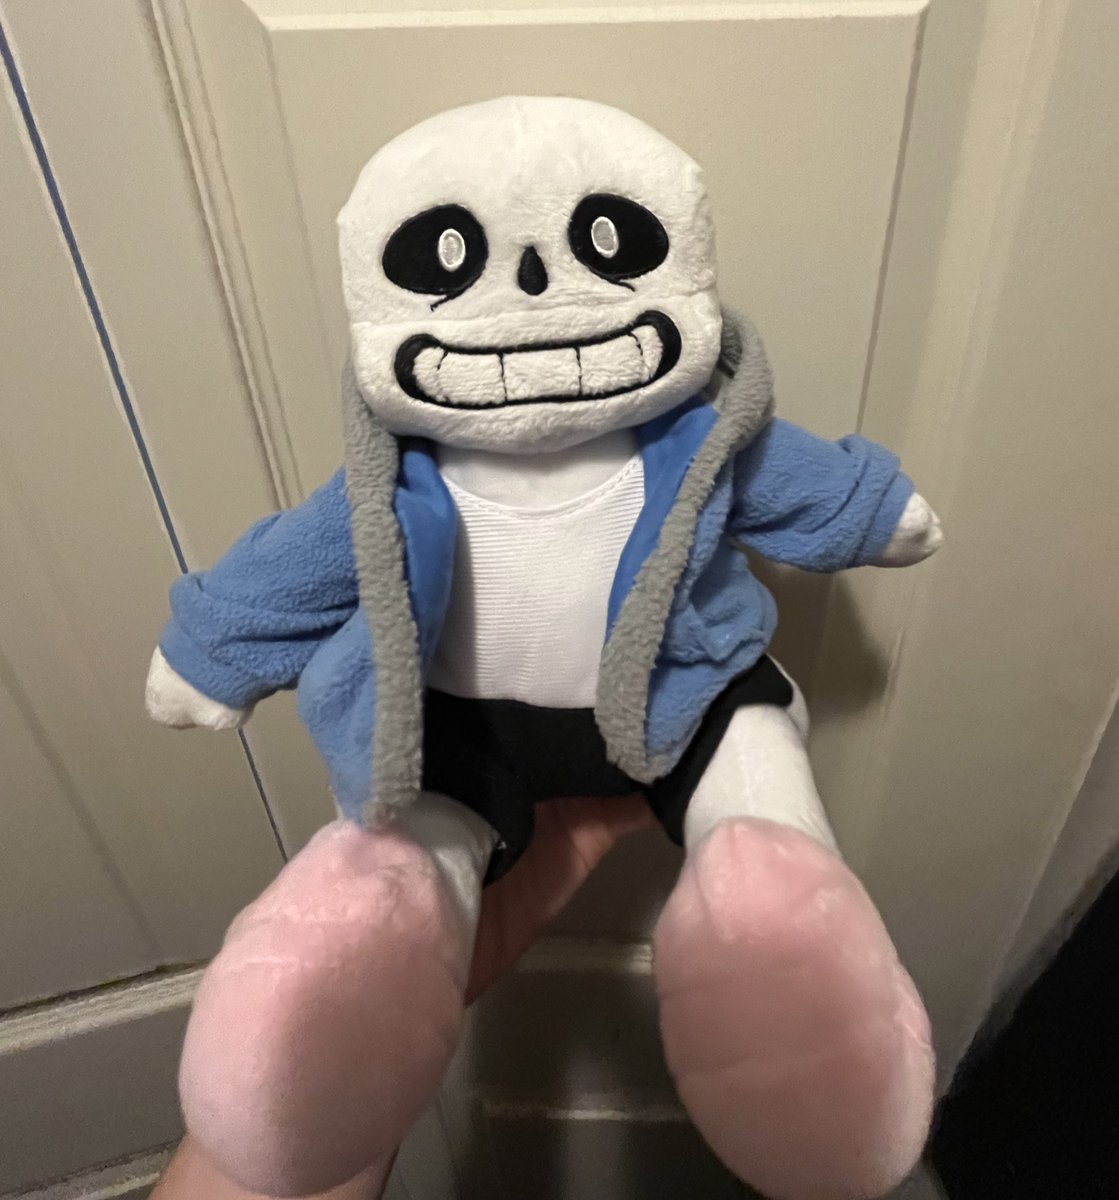 Shoutout to my friend for getting me this 99¢ bootleg Sans plush they found at goodwill